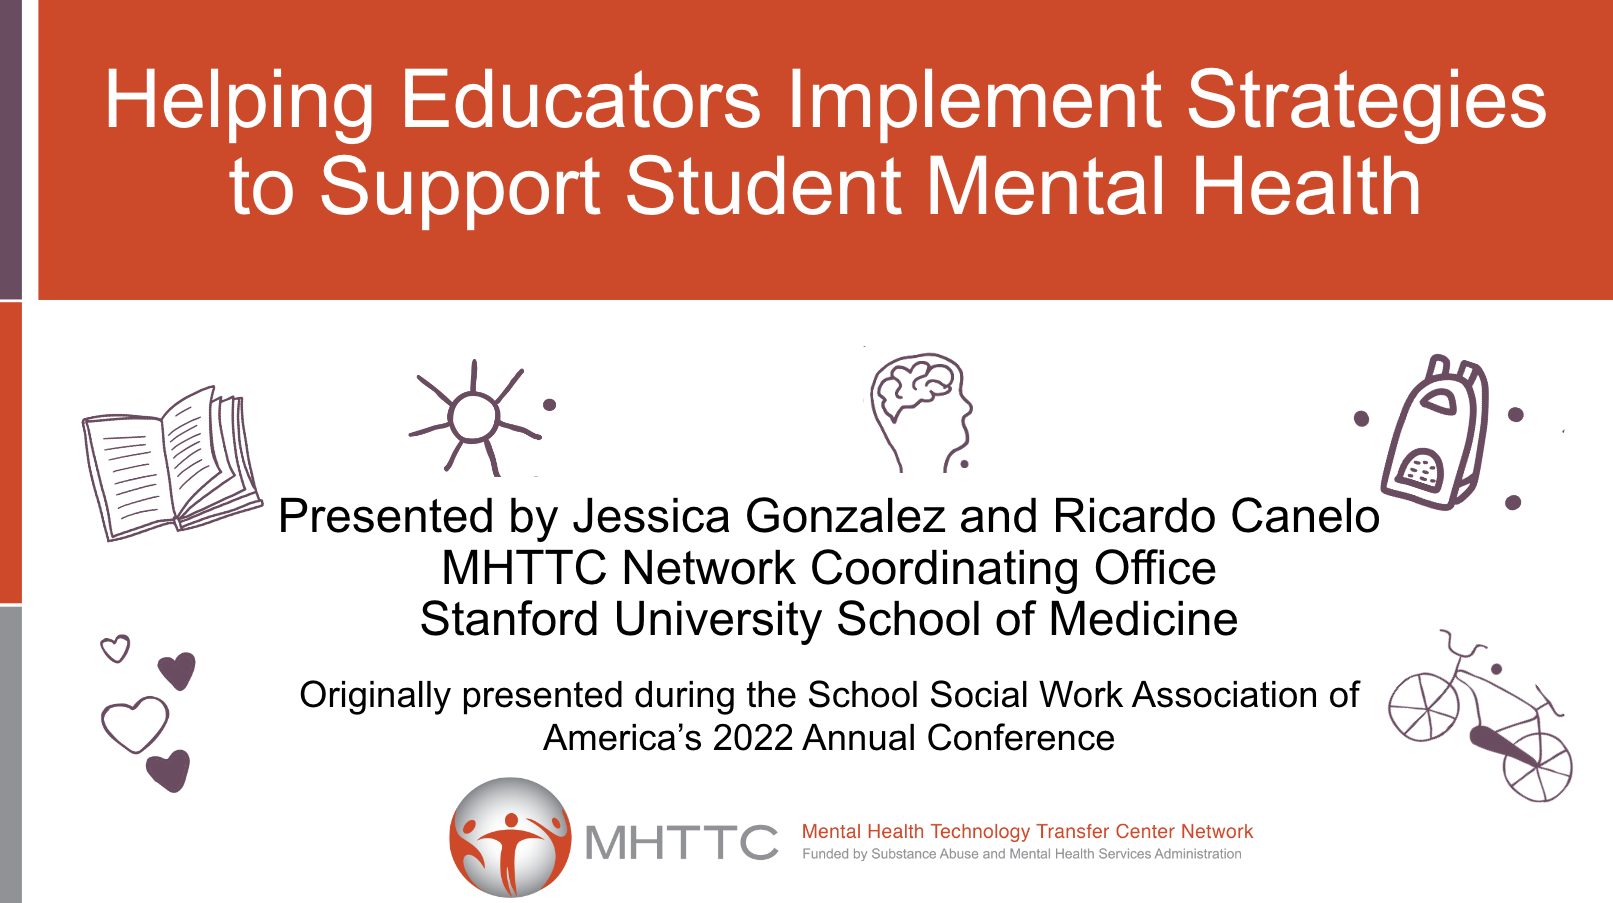 Helping educators implement strategies to support student mental health